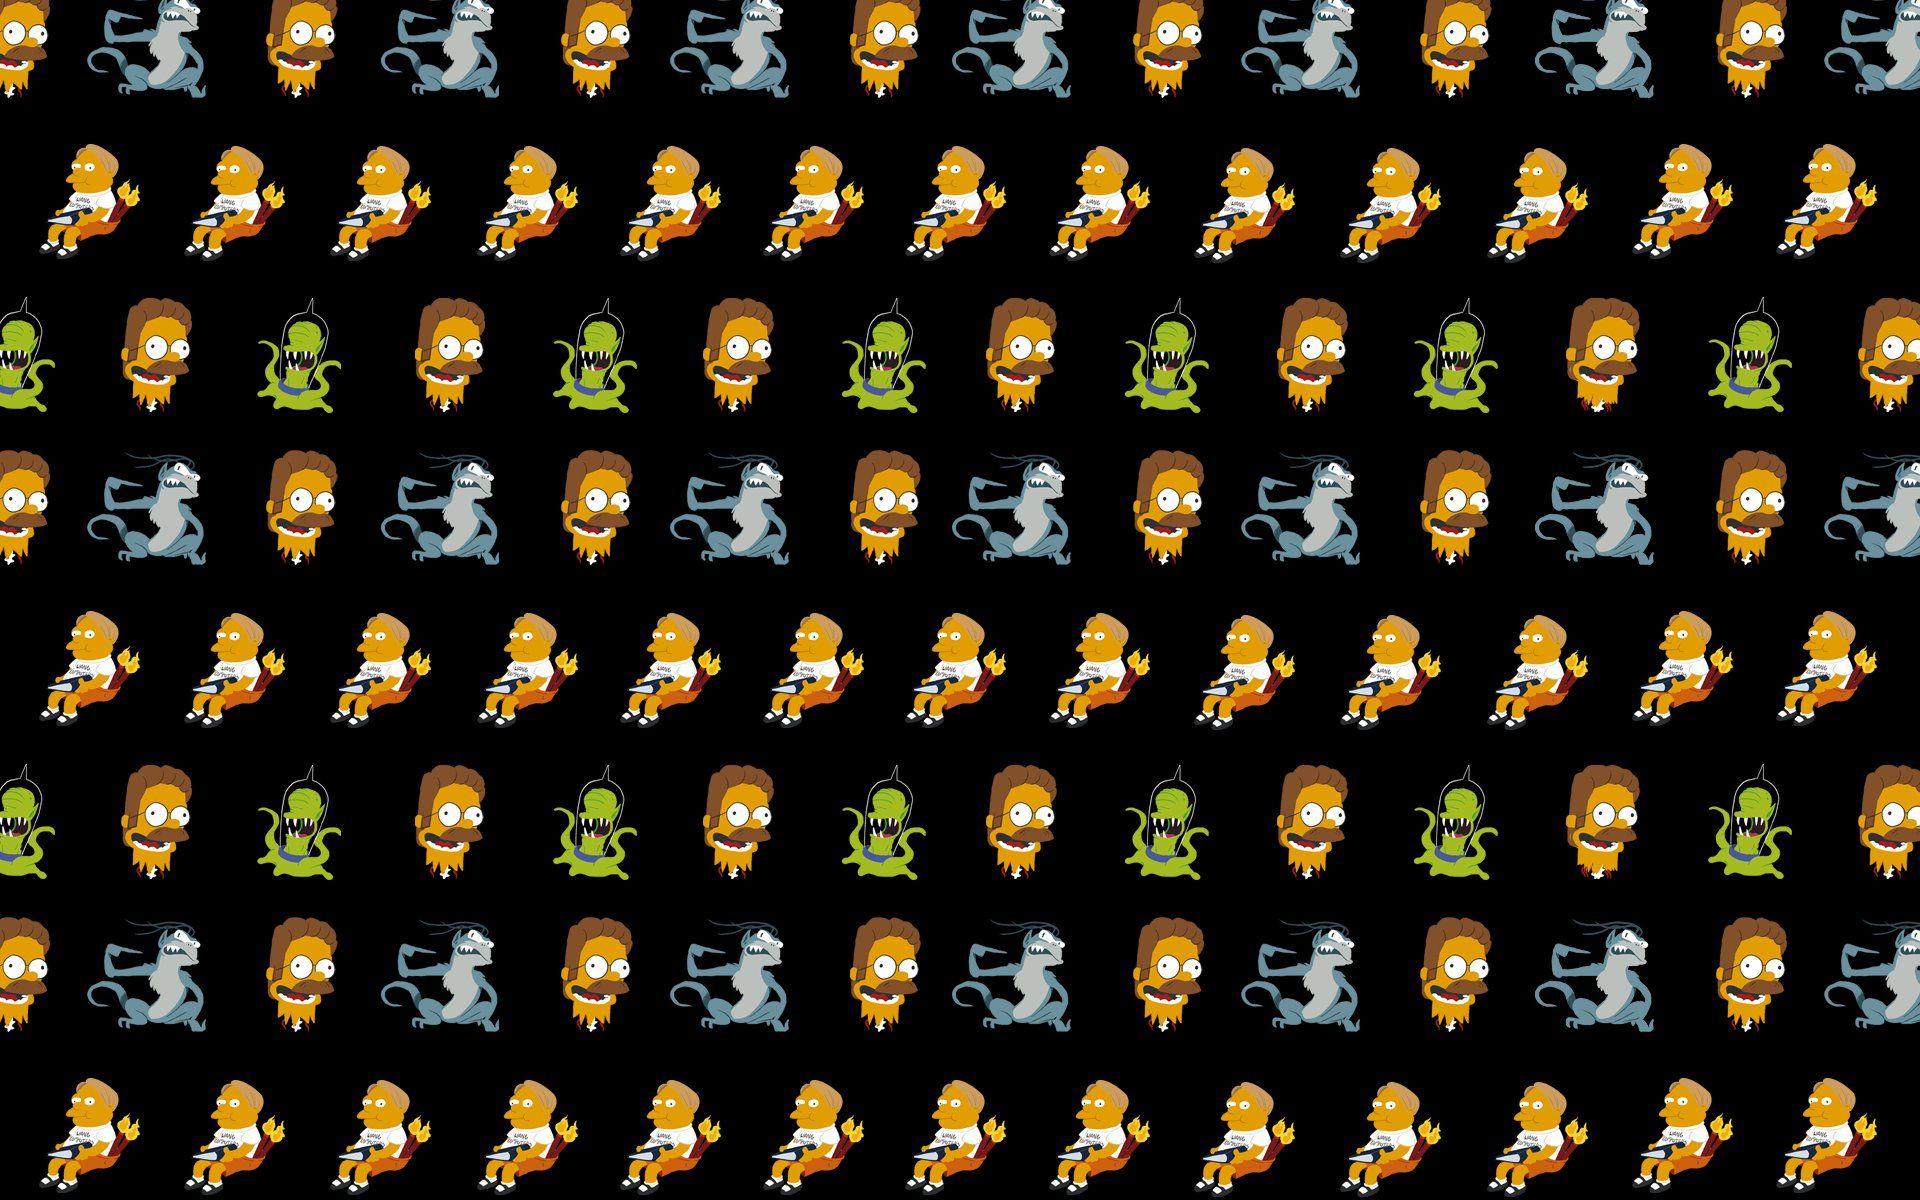 Calloween (1978) 7: This #Simpsons Treehouse of #Horror IV Terror at 5 1⁄2 Feet pattern wallpaper #Halloween Different colours and #iphone wallpaper here